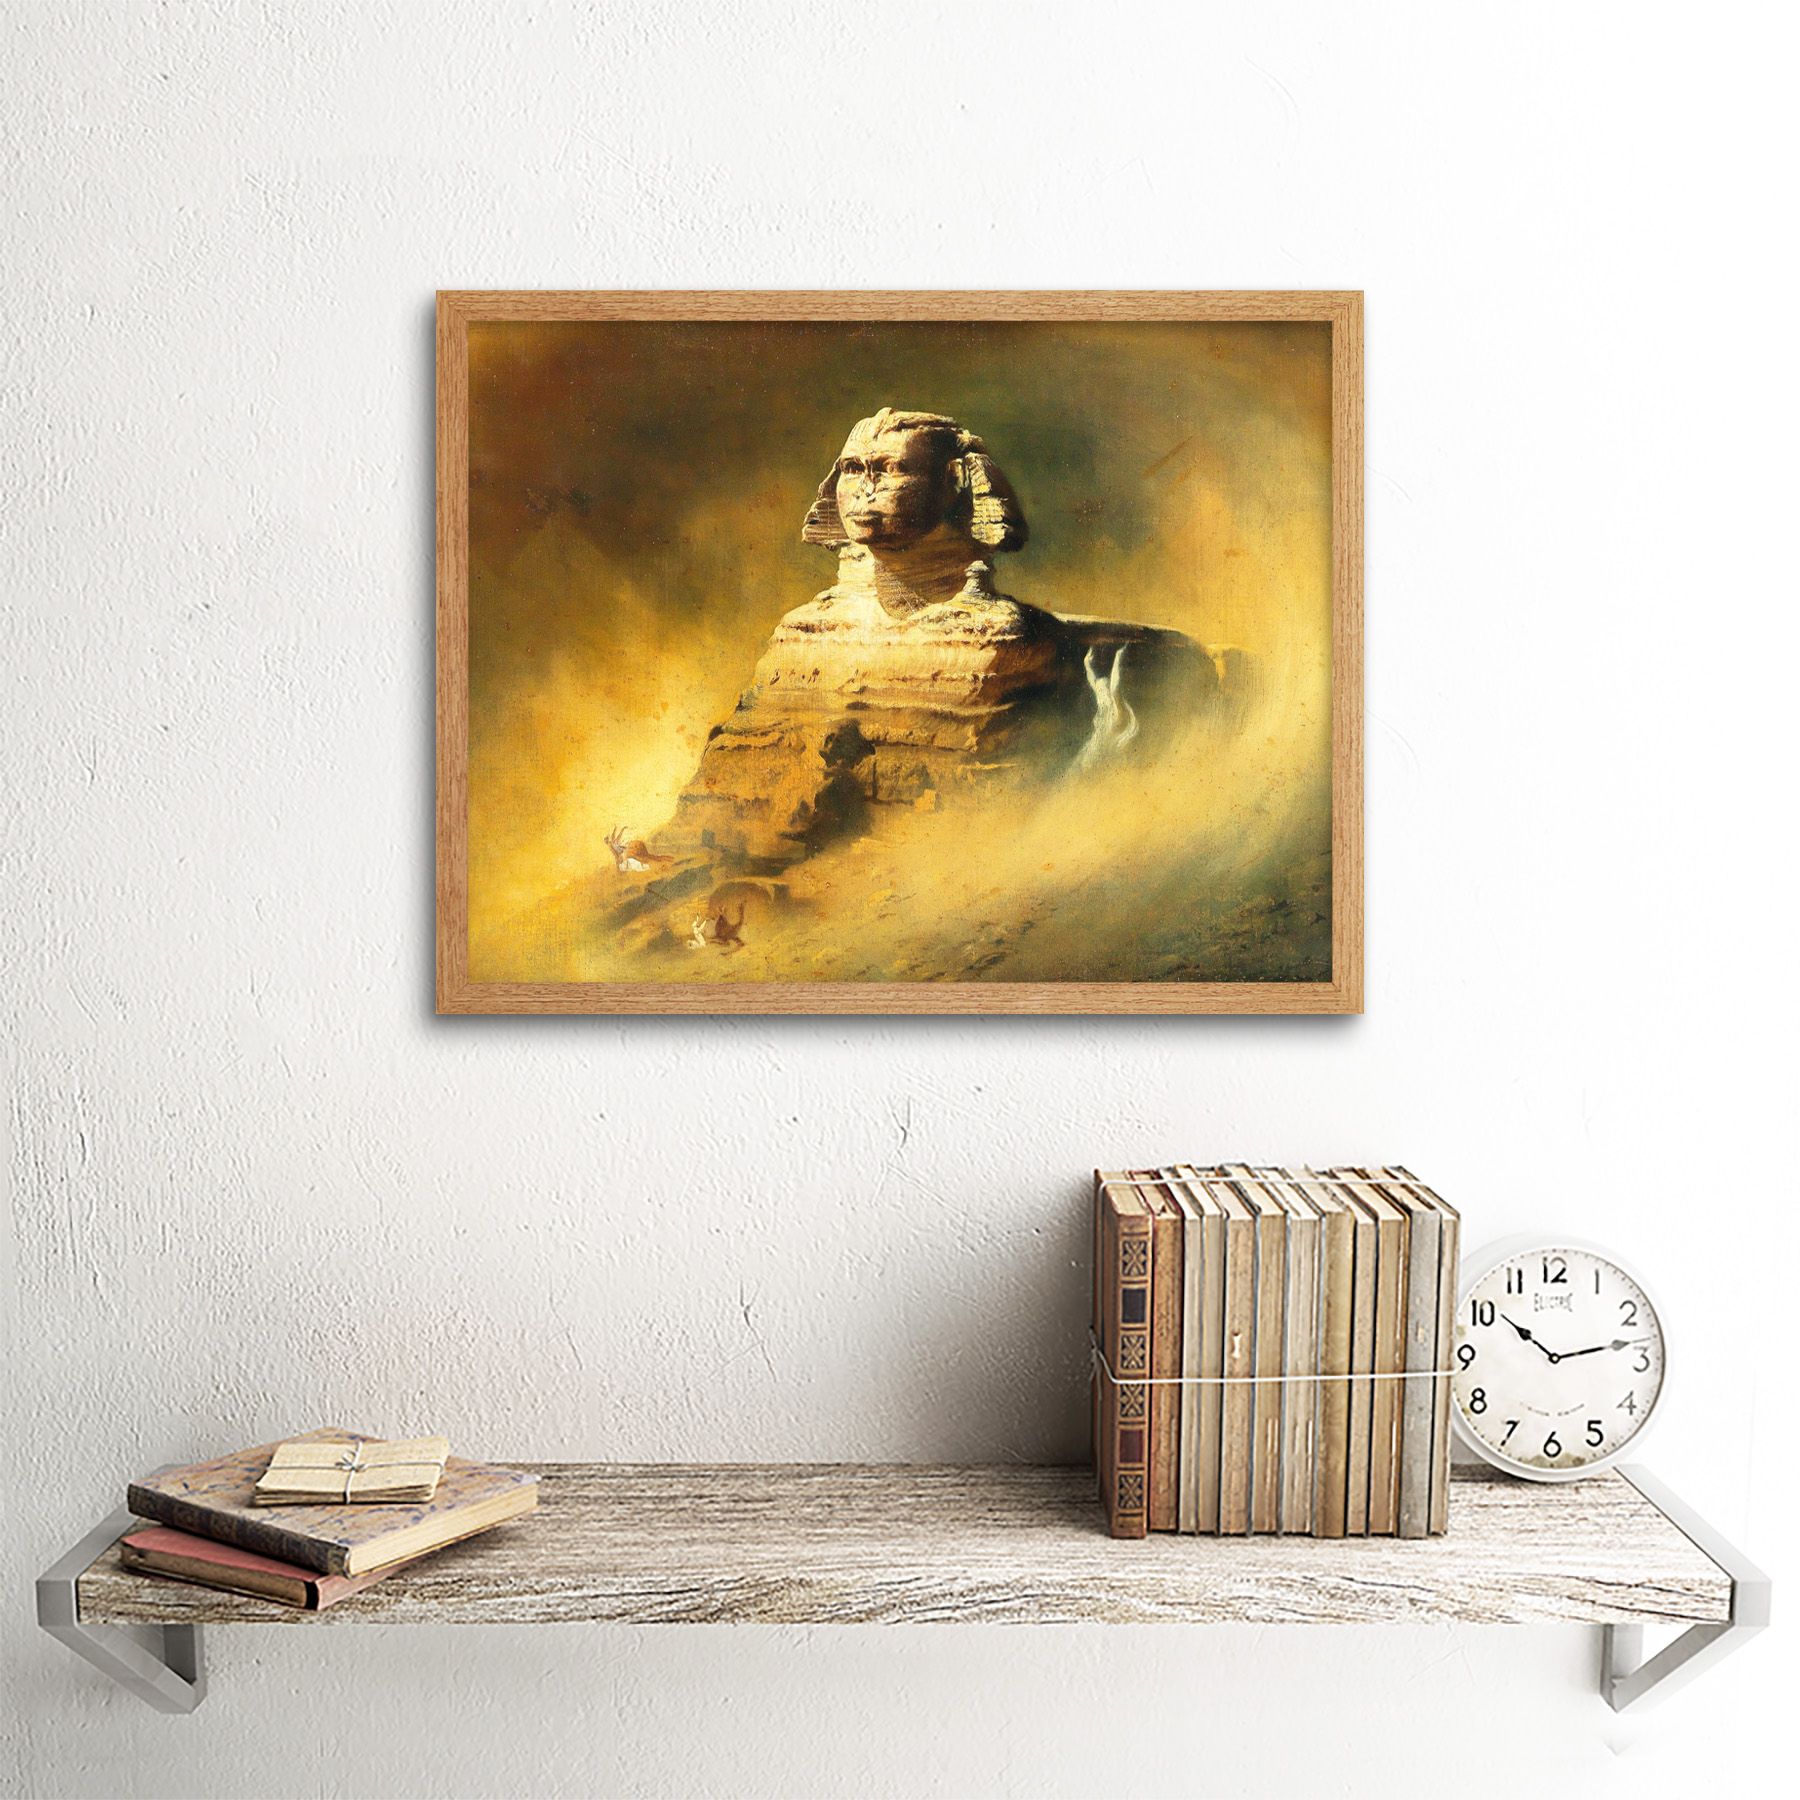 Diefenbach Sphinx Egypt Painting Wall Art Print Framed Within Most Recently Released Spinx Wall Art (View 1 of 20)